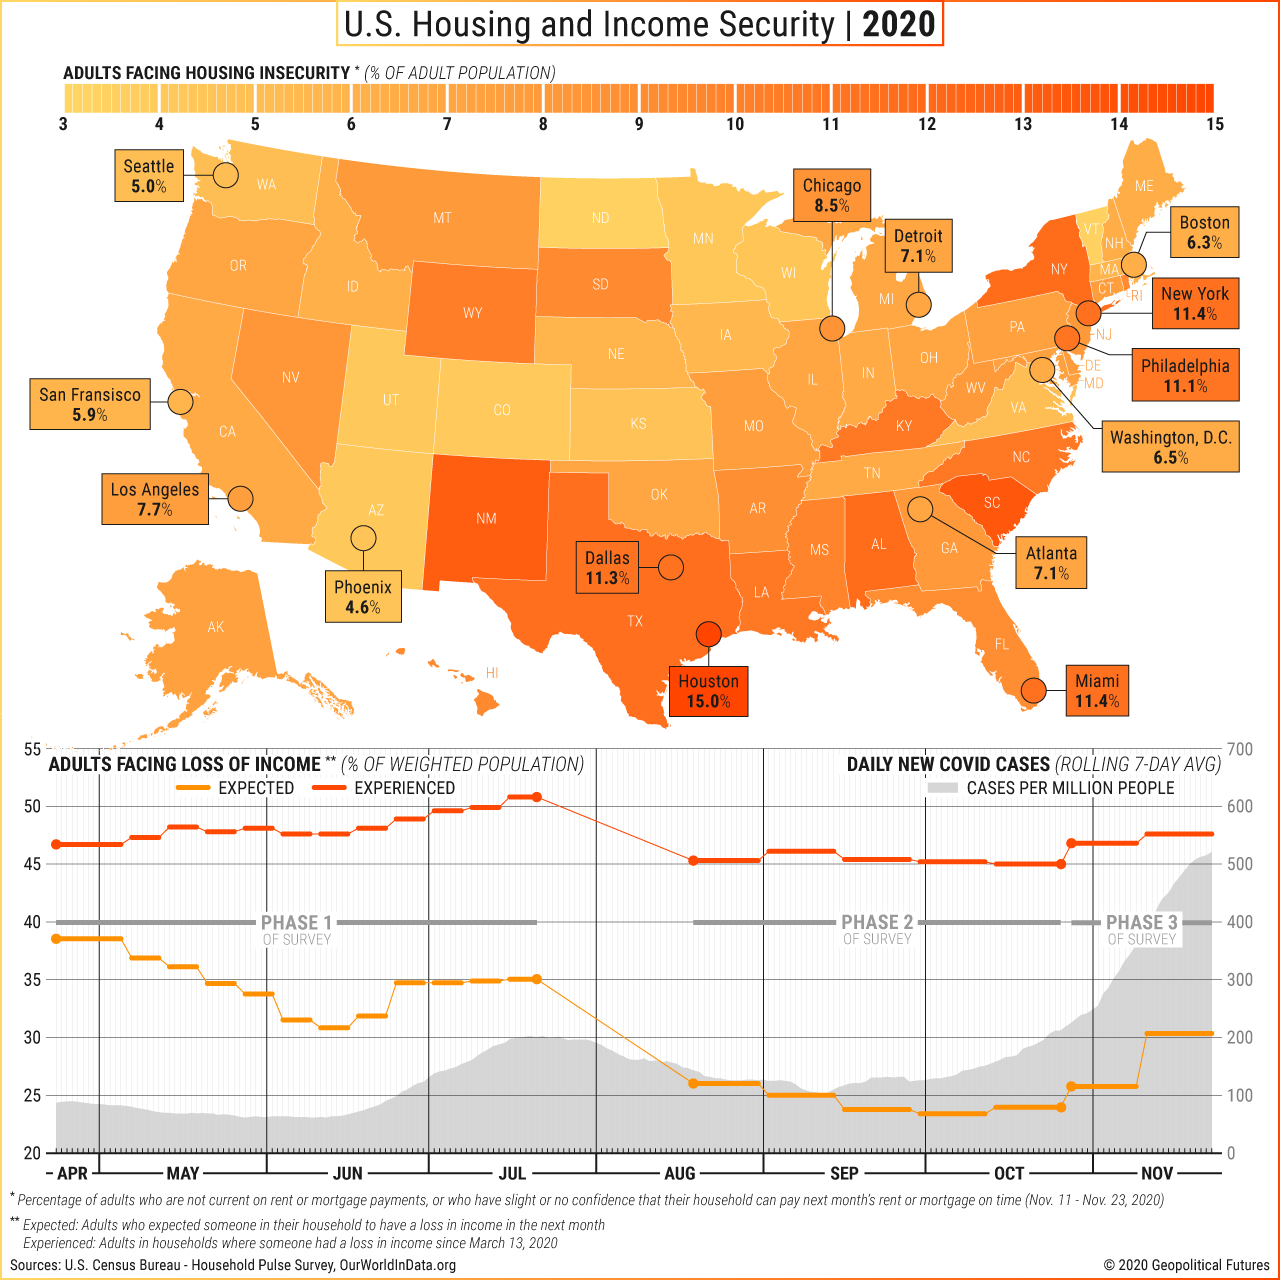 U.S. Housing and Income Security | 2020